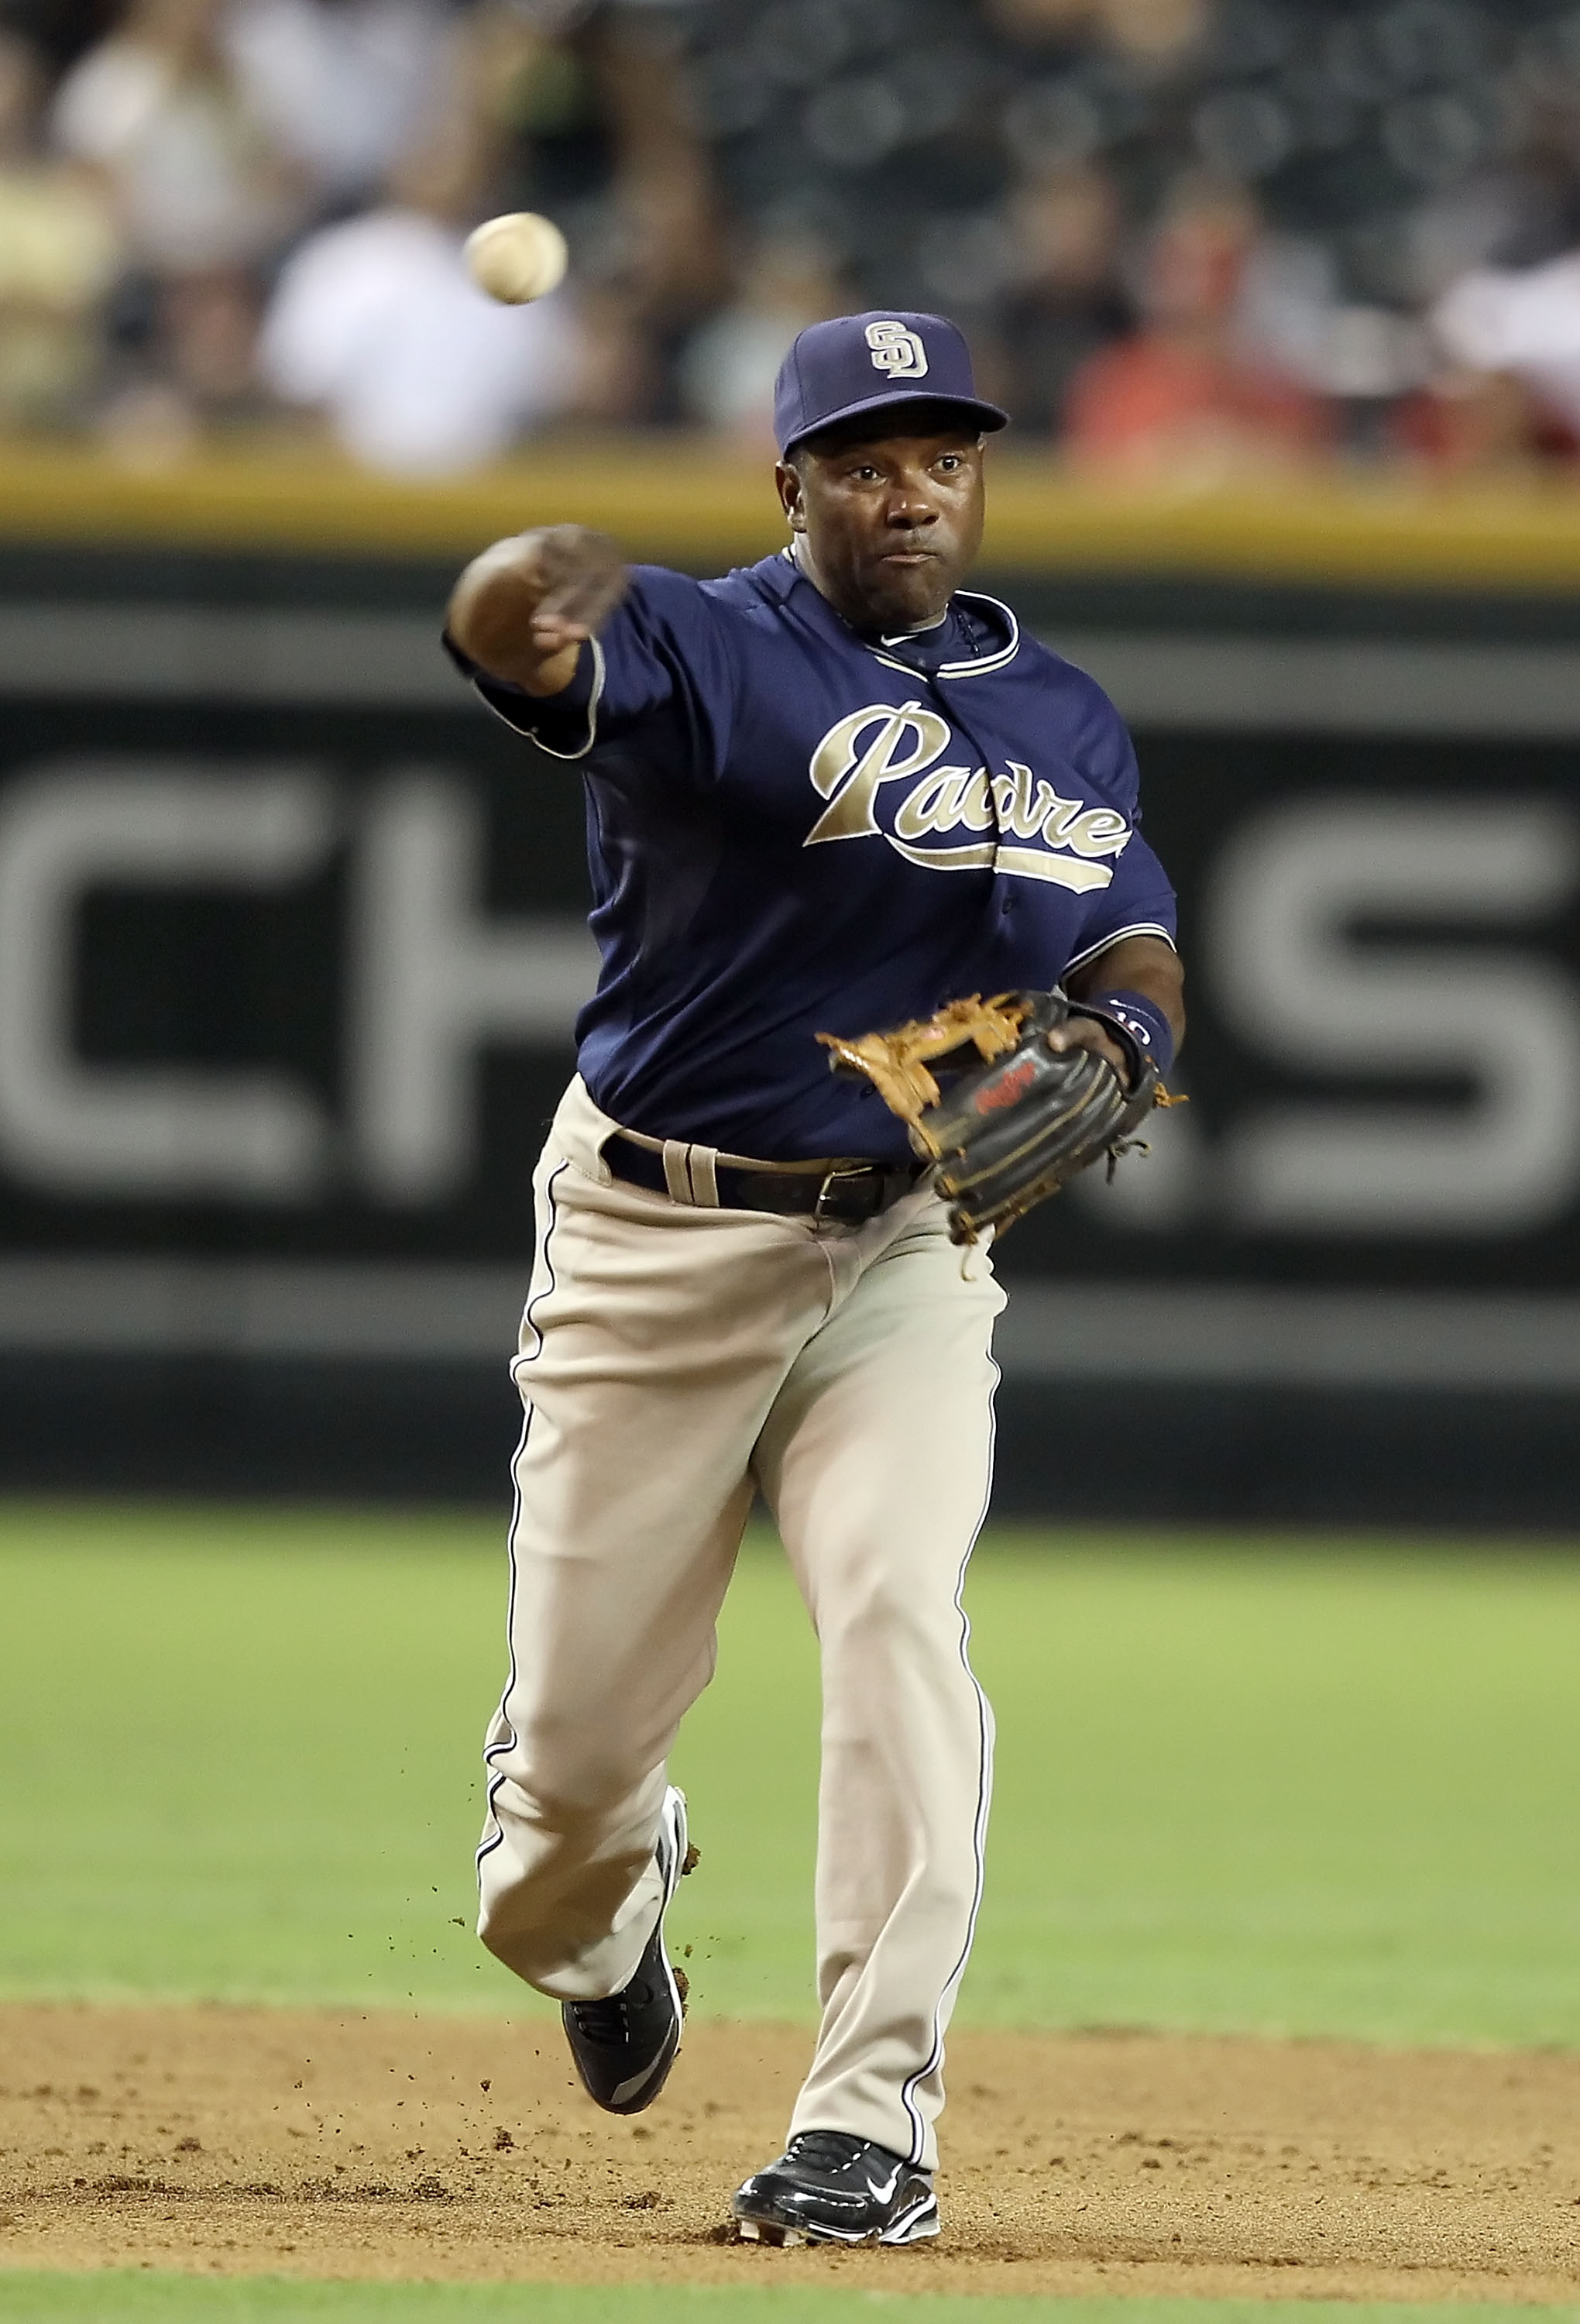 PHOENIX - AUGUST 30:  Infielder Miguel Tejada #10 of the San Diego Padres fields a ground ball out during the Major League Baseball game against the Arizona Diamondbacks at Chase Field on August 30, 2010 in Phoenix, Arizona. The Diamondbacks defeated the